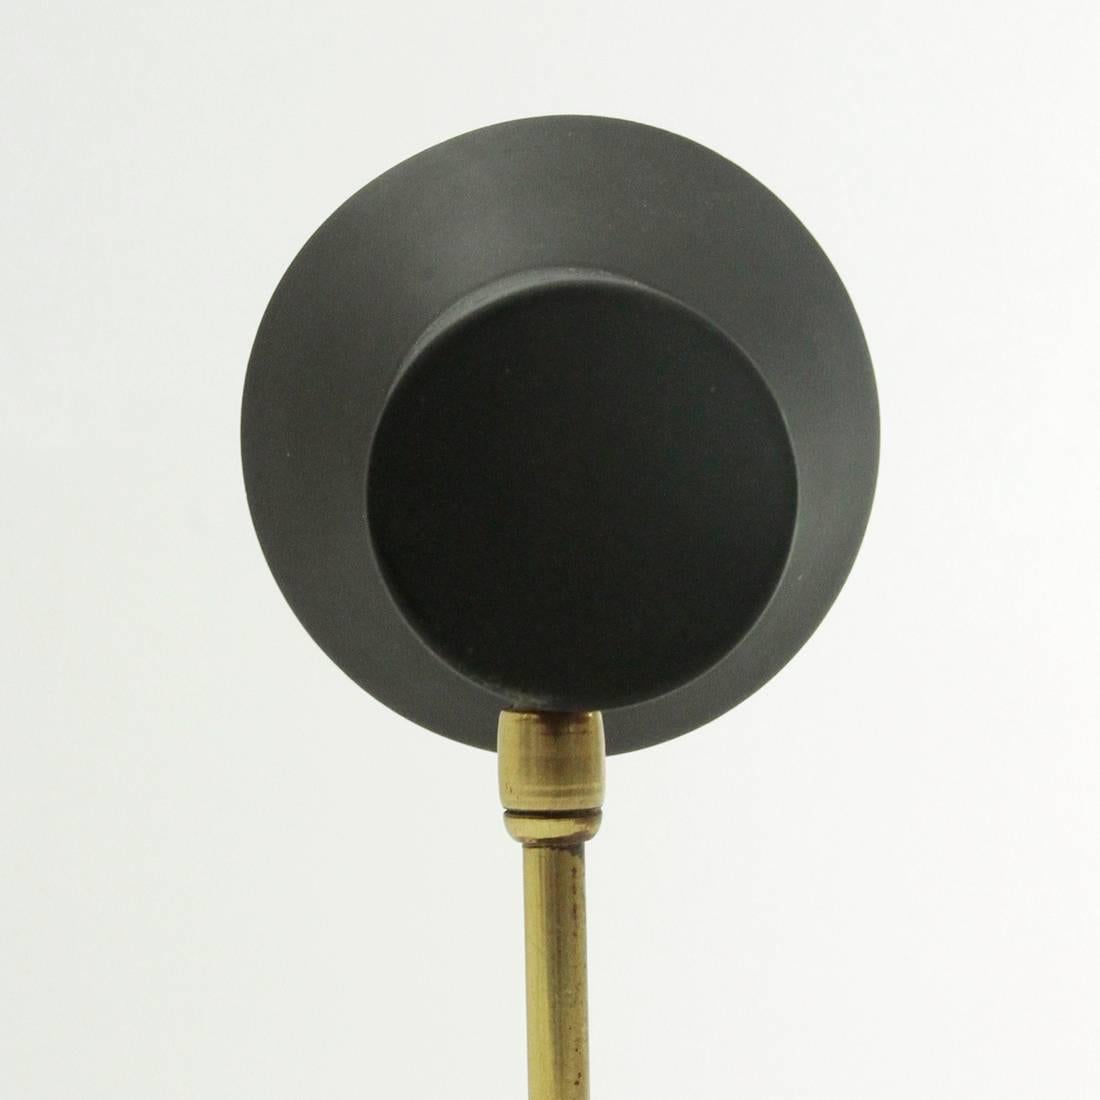 Mid-Century Modern Italian Brass and Black Painted Metal Sconce, 1950s